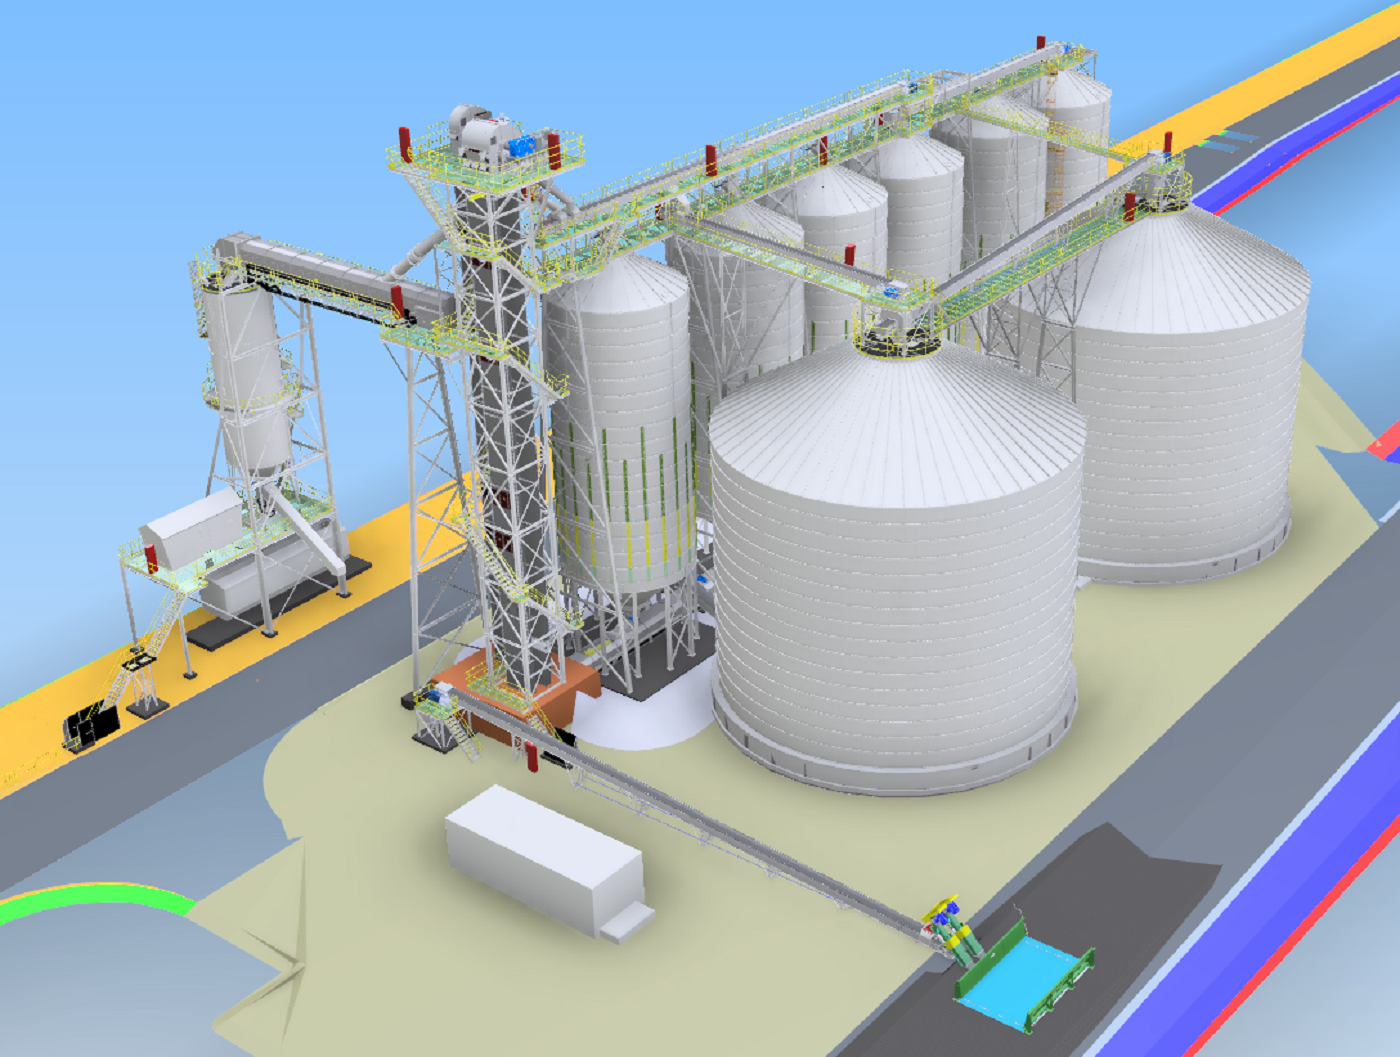 3D model of the Fixed Rail Loading facility component of the Moora Rapid Rail Outloading Project.